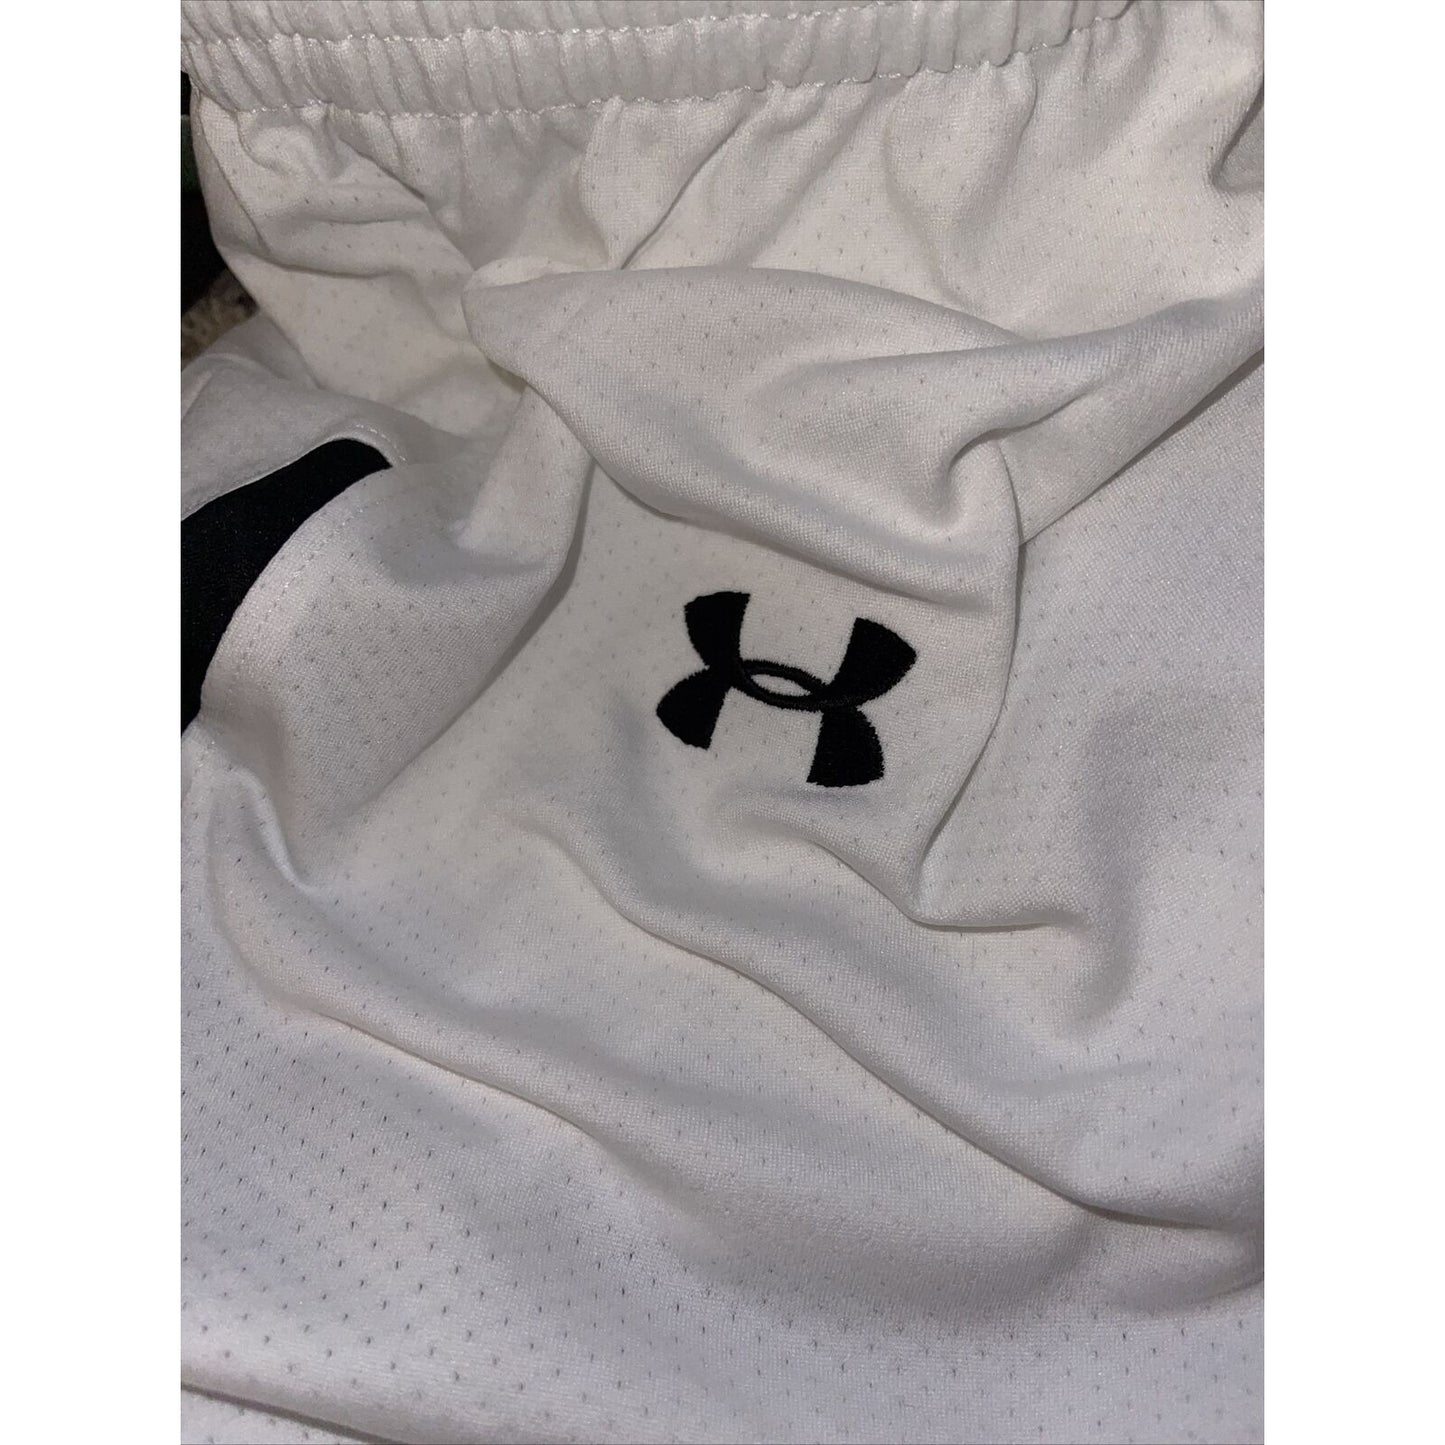 Boy's under armour Youth XL white and Black Lacrosse style shorts no pockets